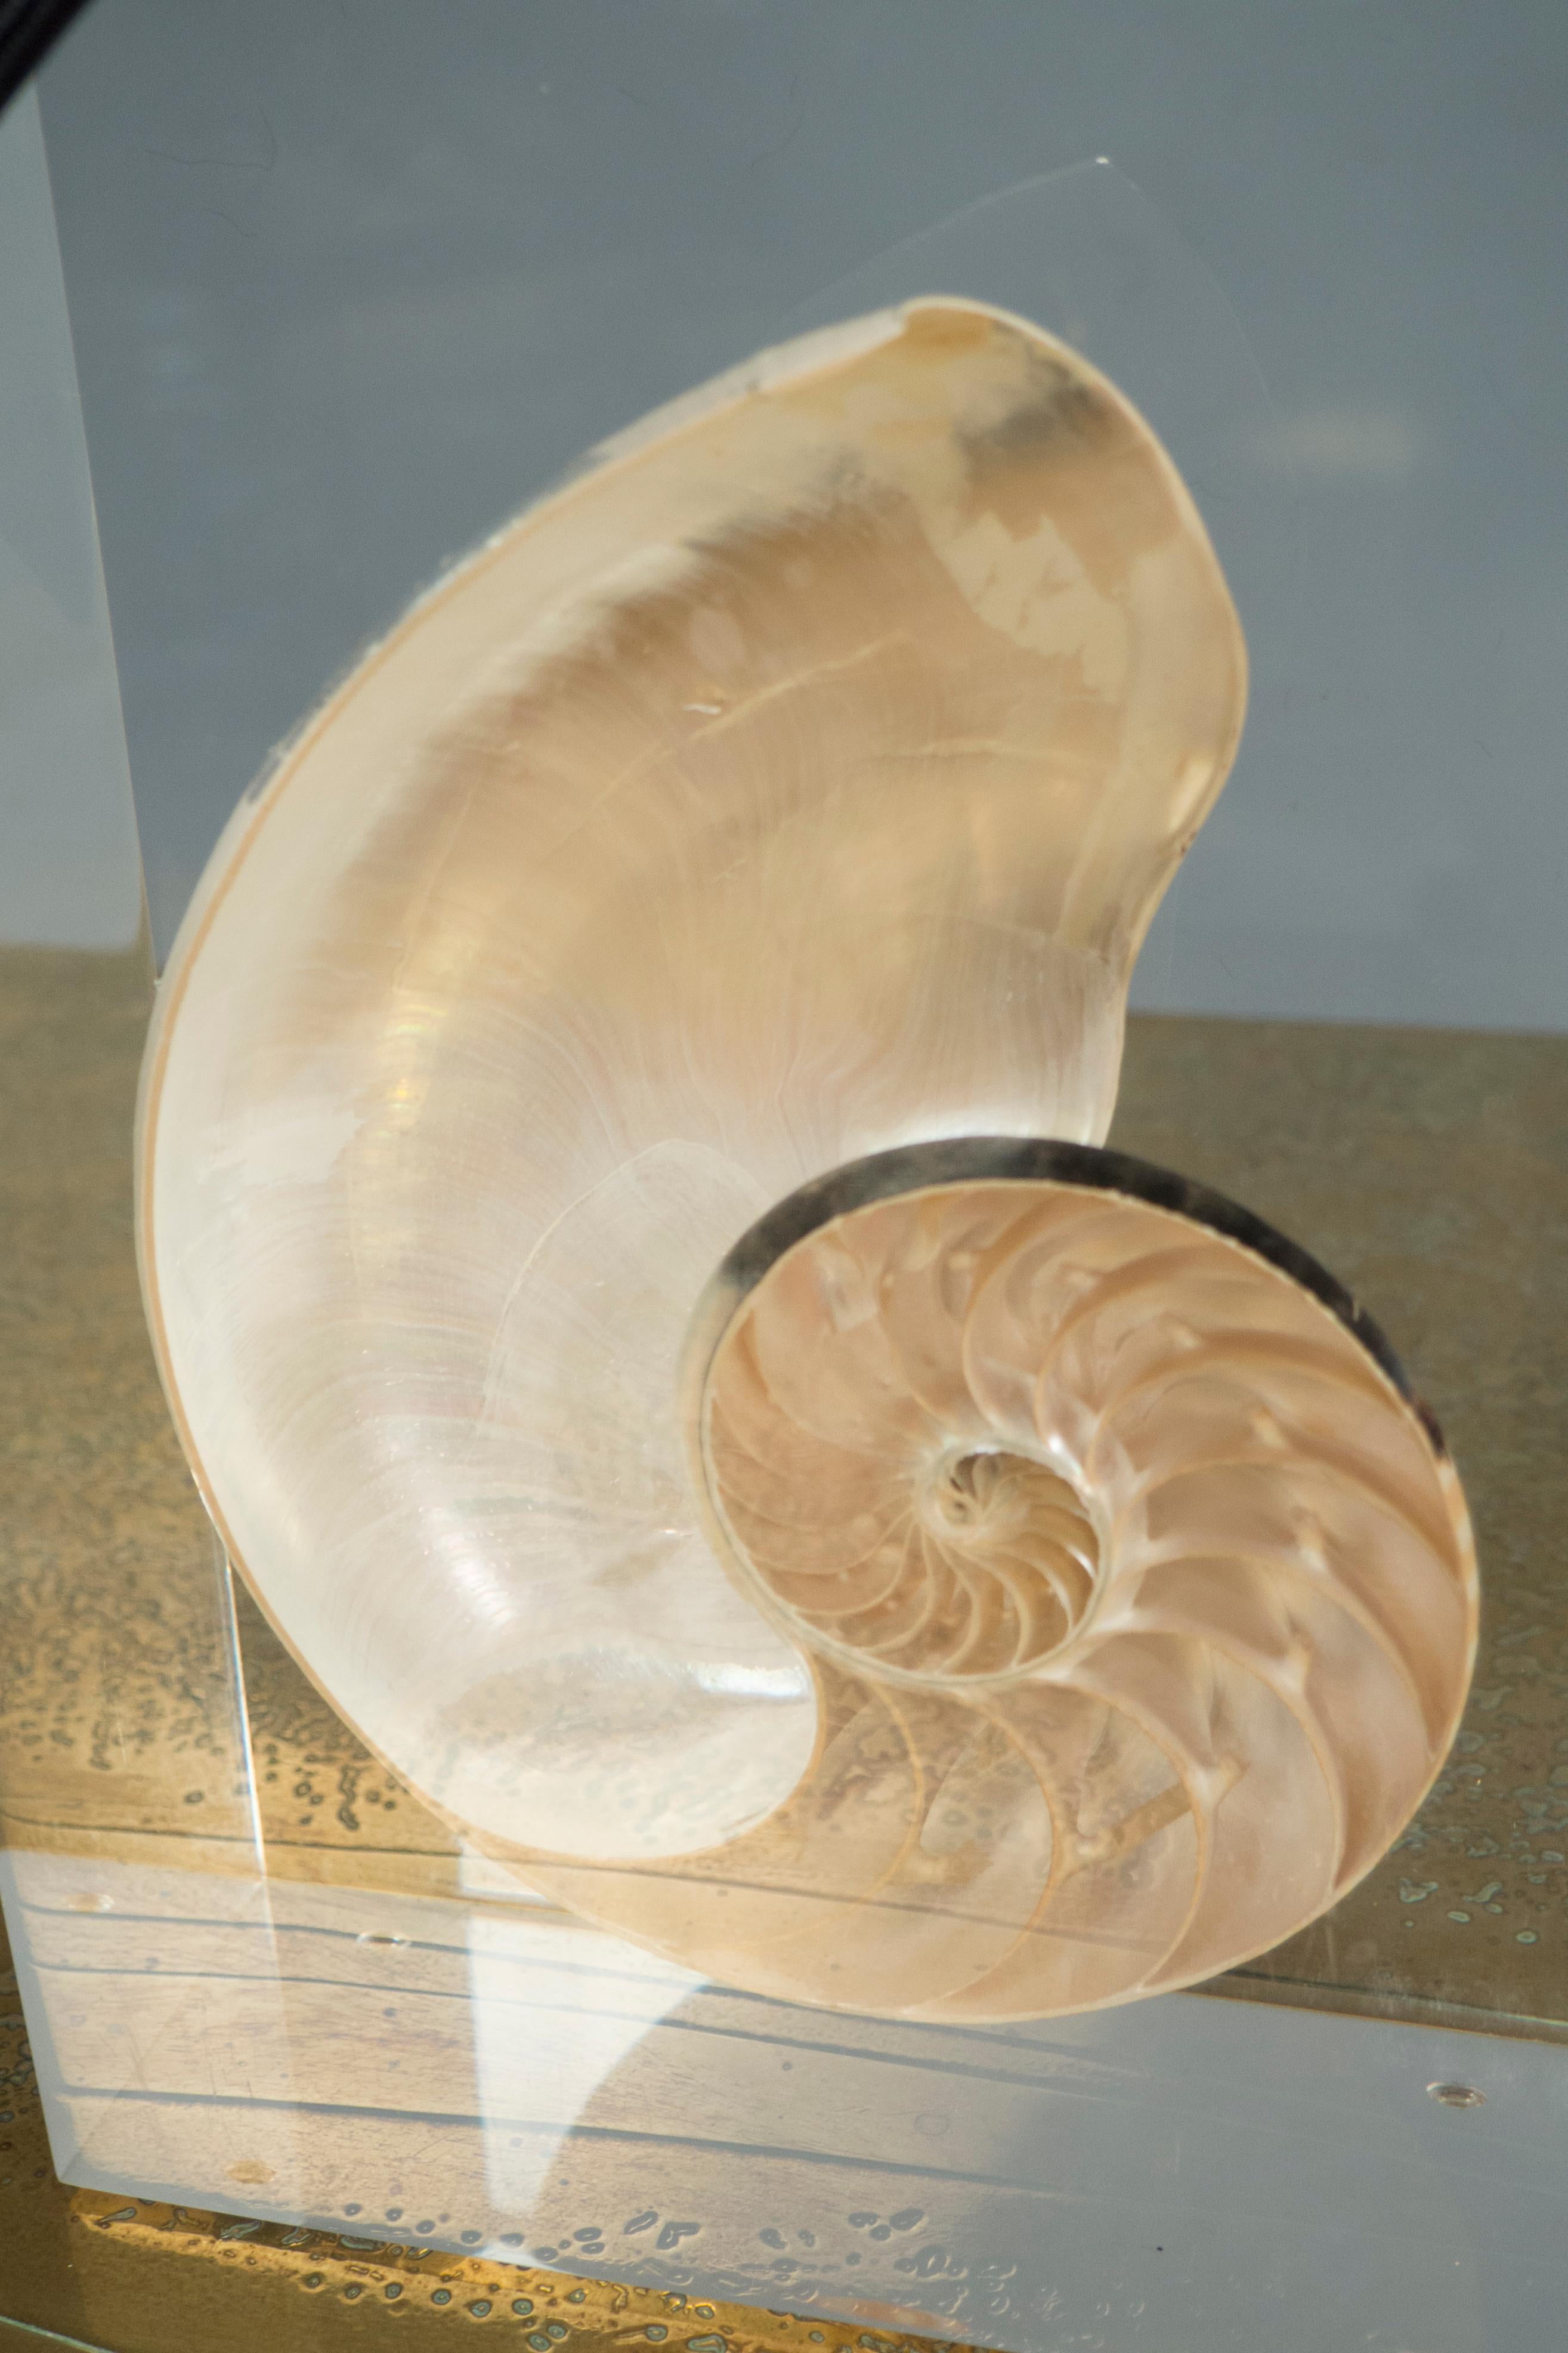 Pair of Table lamps, each lamp consisting of a rectangular, clear acrylic block featuring a halved spiral seashell. Nickel hardware, rayon cords.

(Lamp shade not included)